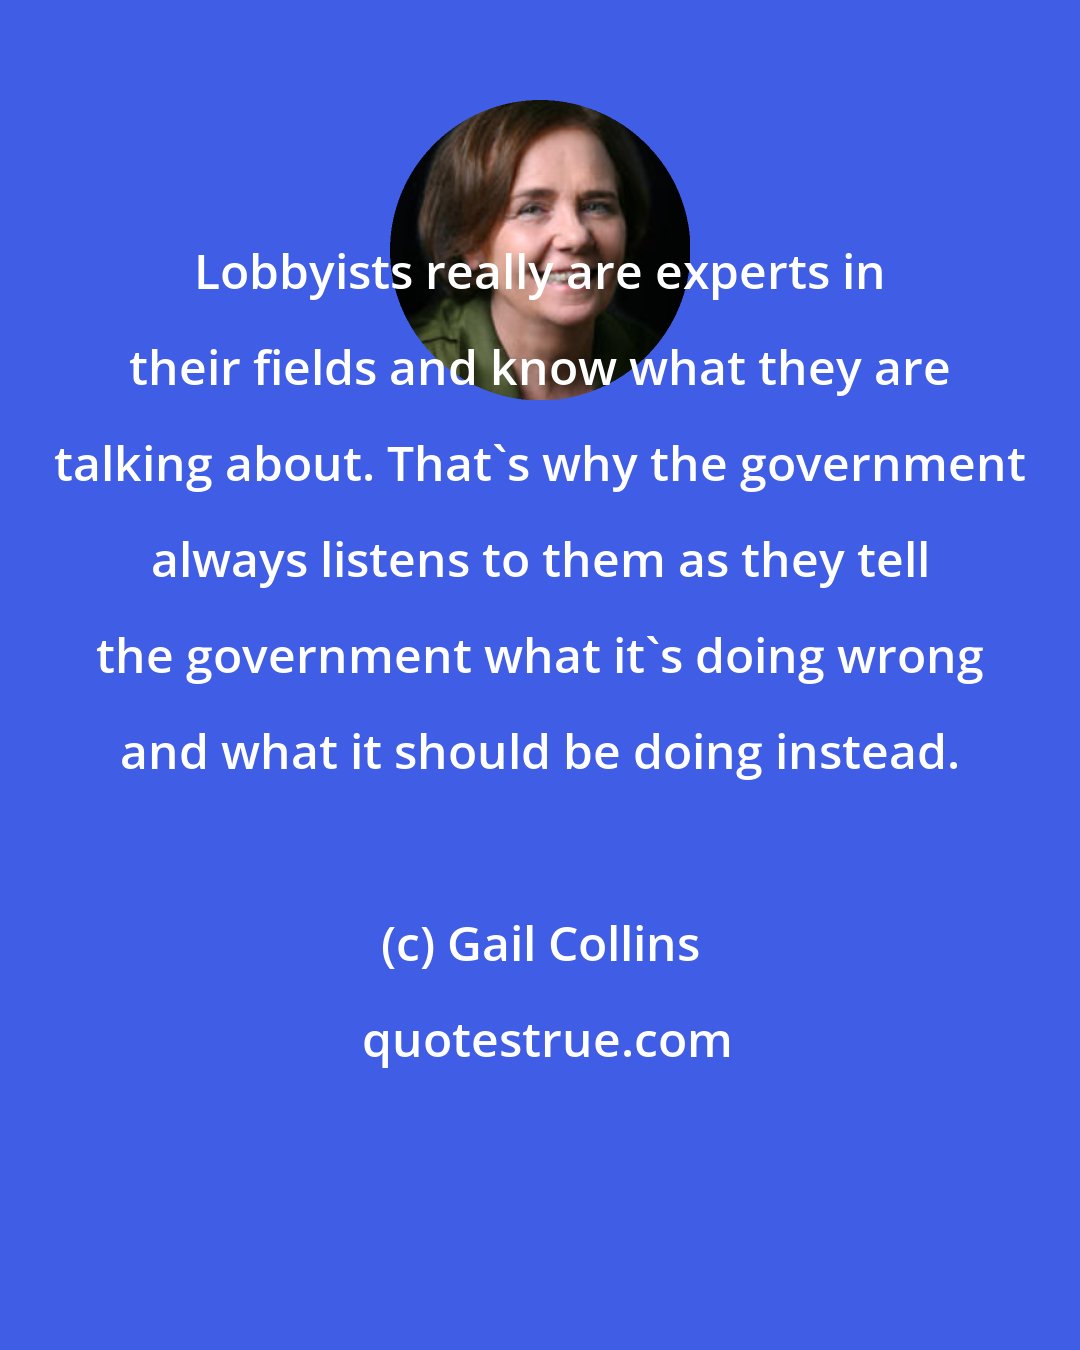 Gail Collins: Lobbyists really are experts in their fields and know what they are talking about. That's why the government always listens to them as they tell the government what it's doing wrong and what it should be doing instead.